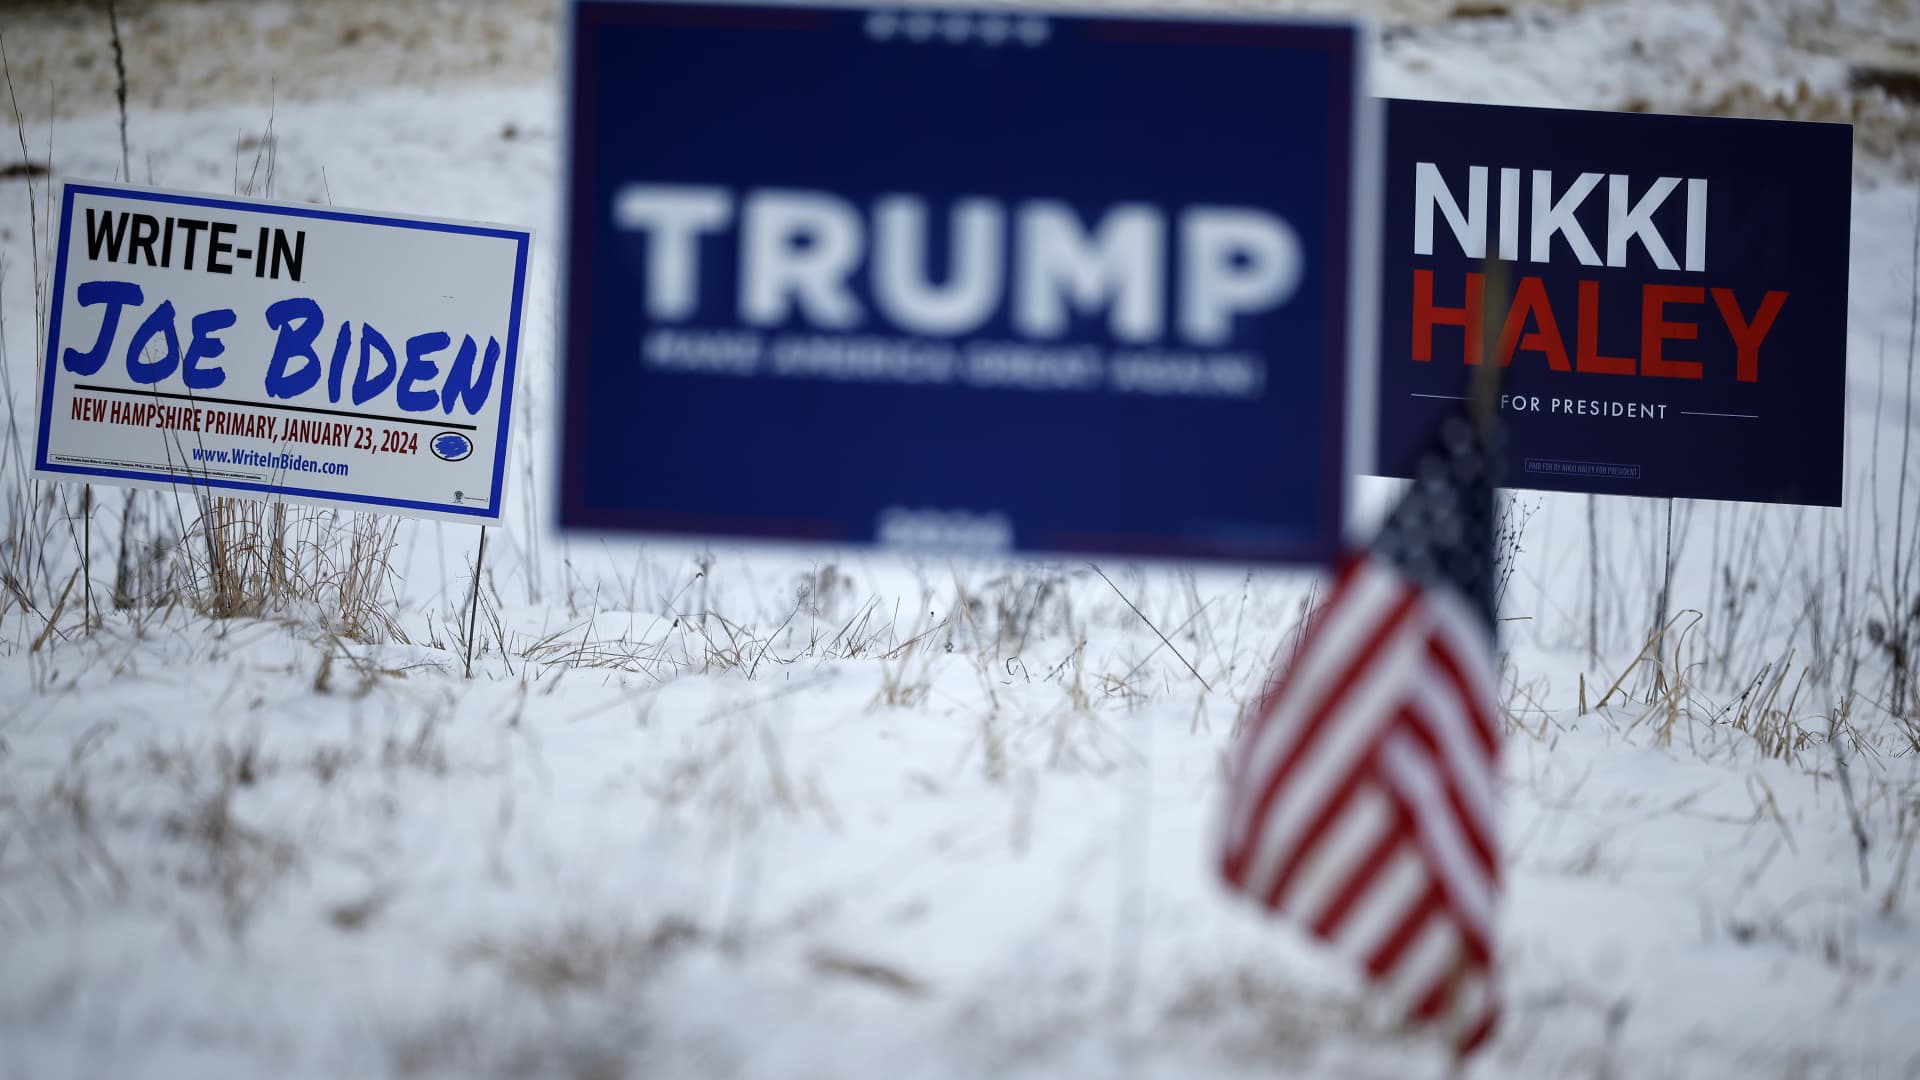 Campaign signs for Republican presidential candidates former President Donald Trump and former United Nations Ambassador Nikki Haley stand next to a sign asking voters to write in President Joe Biden in the Jan. 23 primary election, in Loudon, New Hampshire, on Jan. 19, 2024.